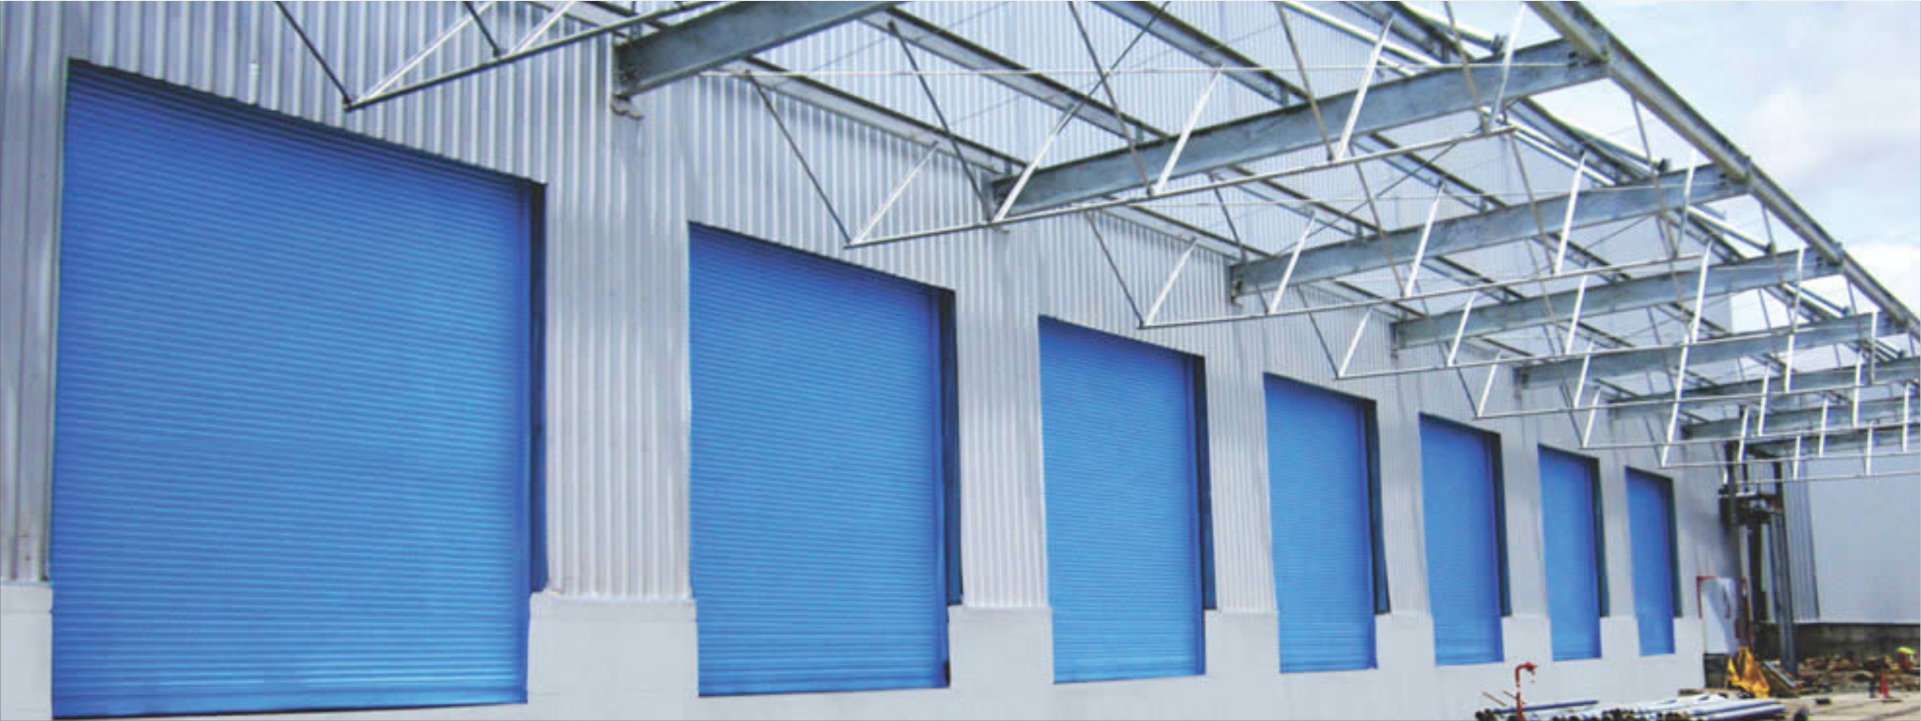 Manufacturer & Supplier of Remote Control Rolling Shutters